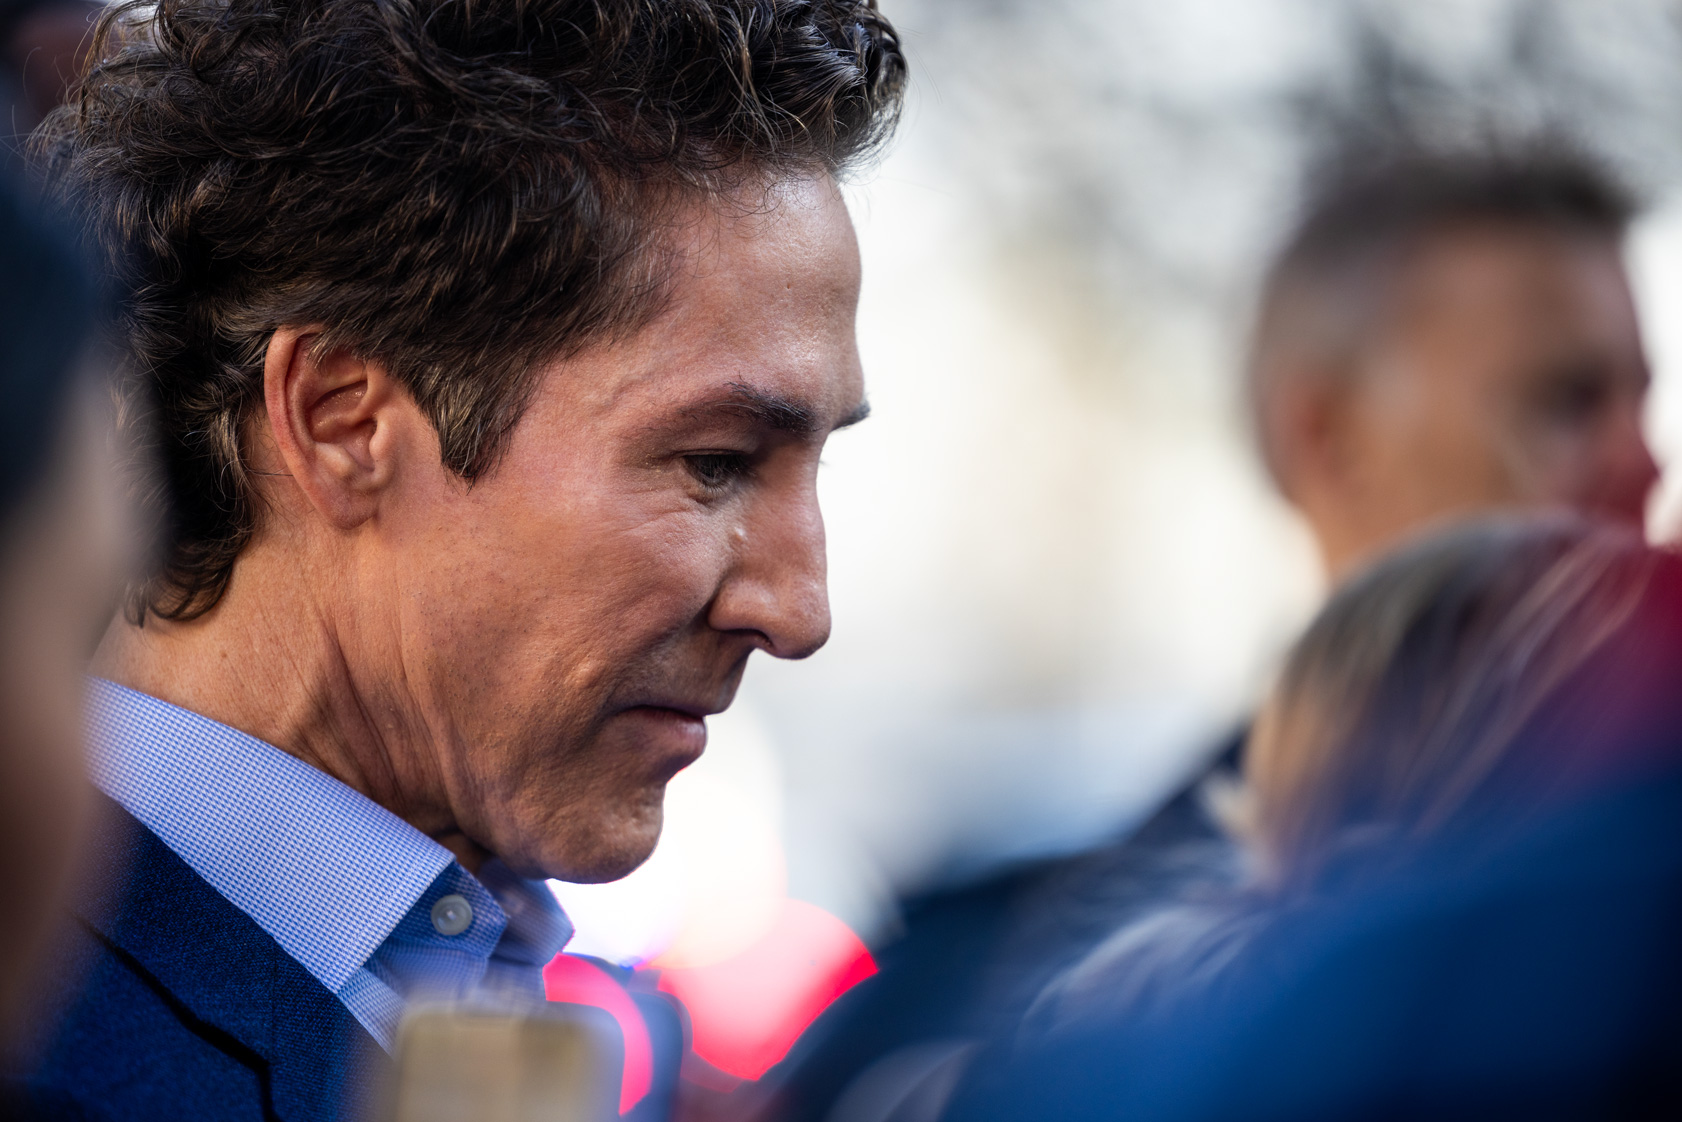 Joel Osteen listens to Chief Troy Finner speak during a press conference after a reported shooting at Lakewood Church, 